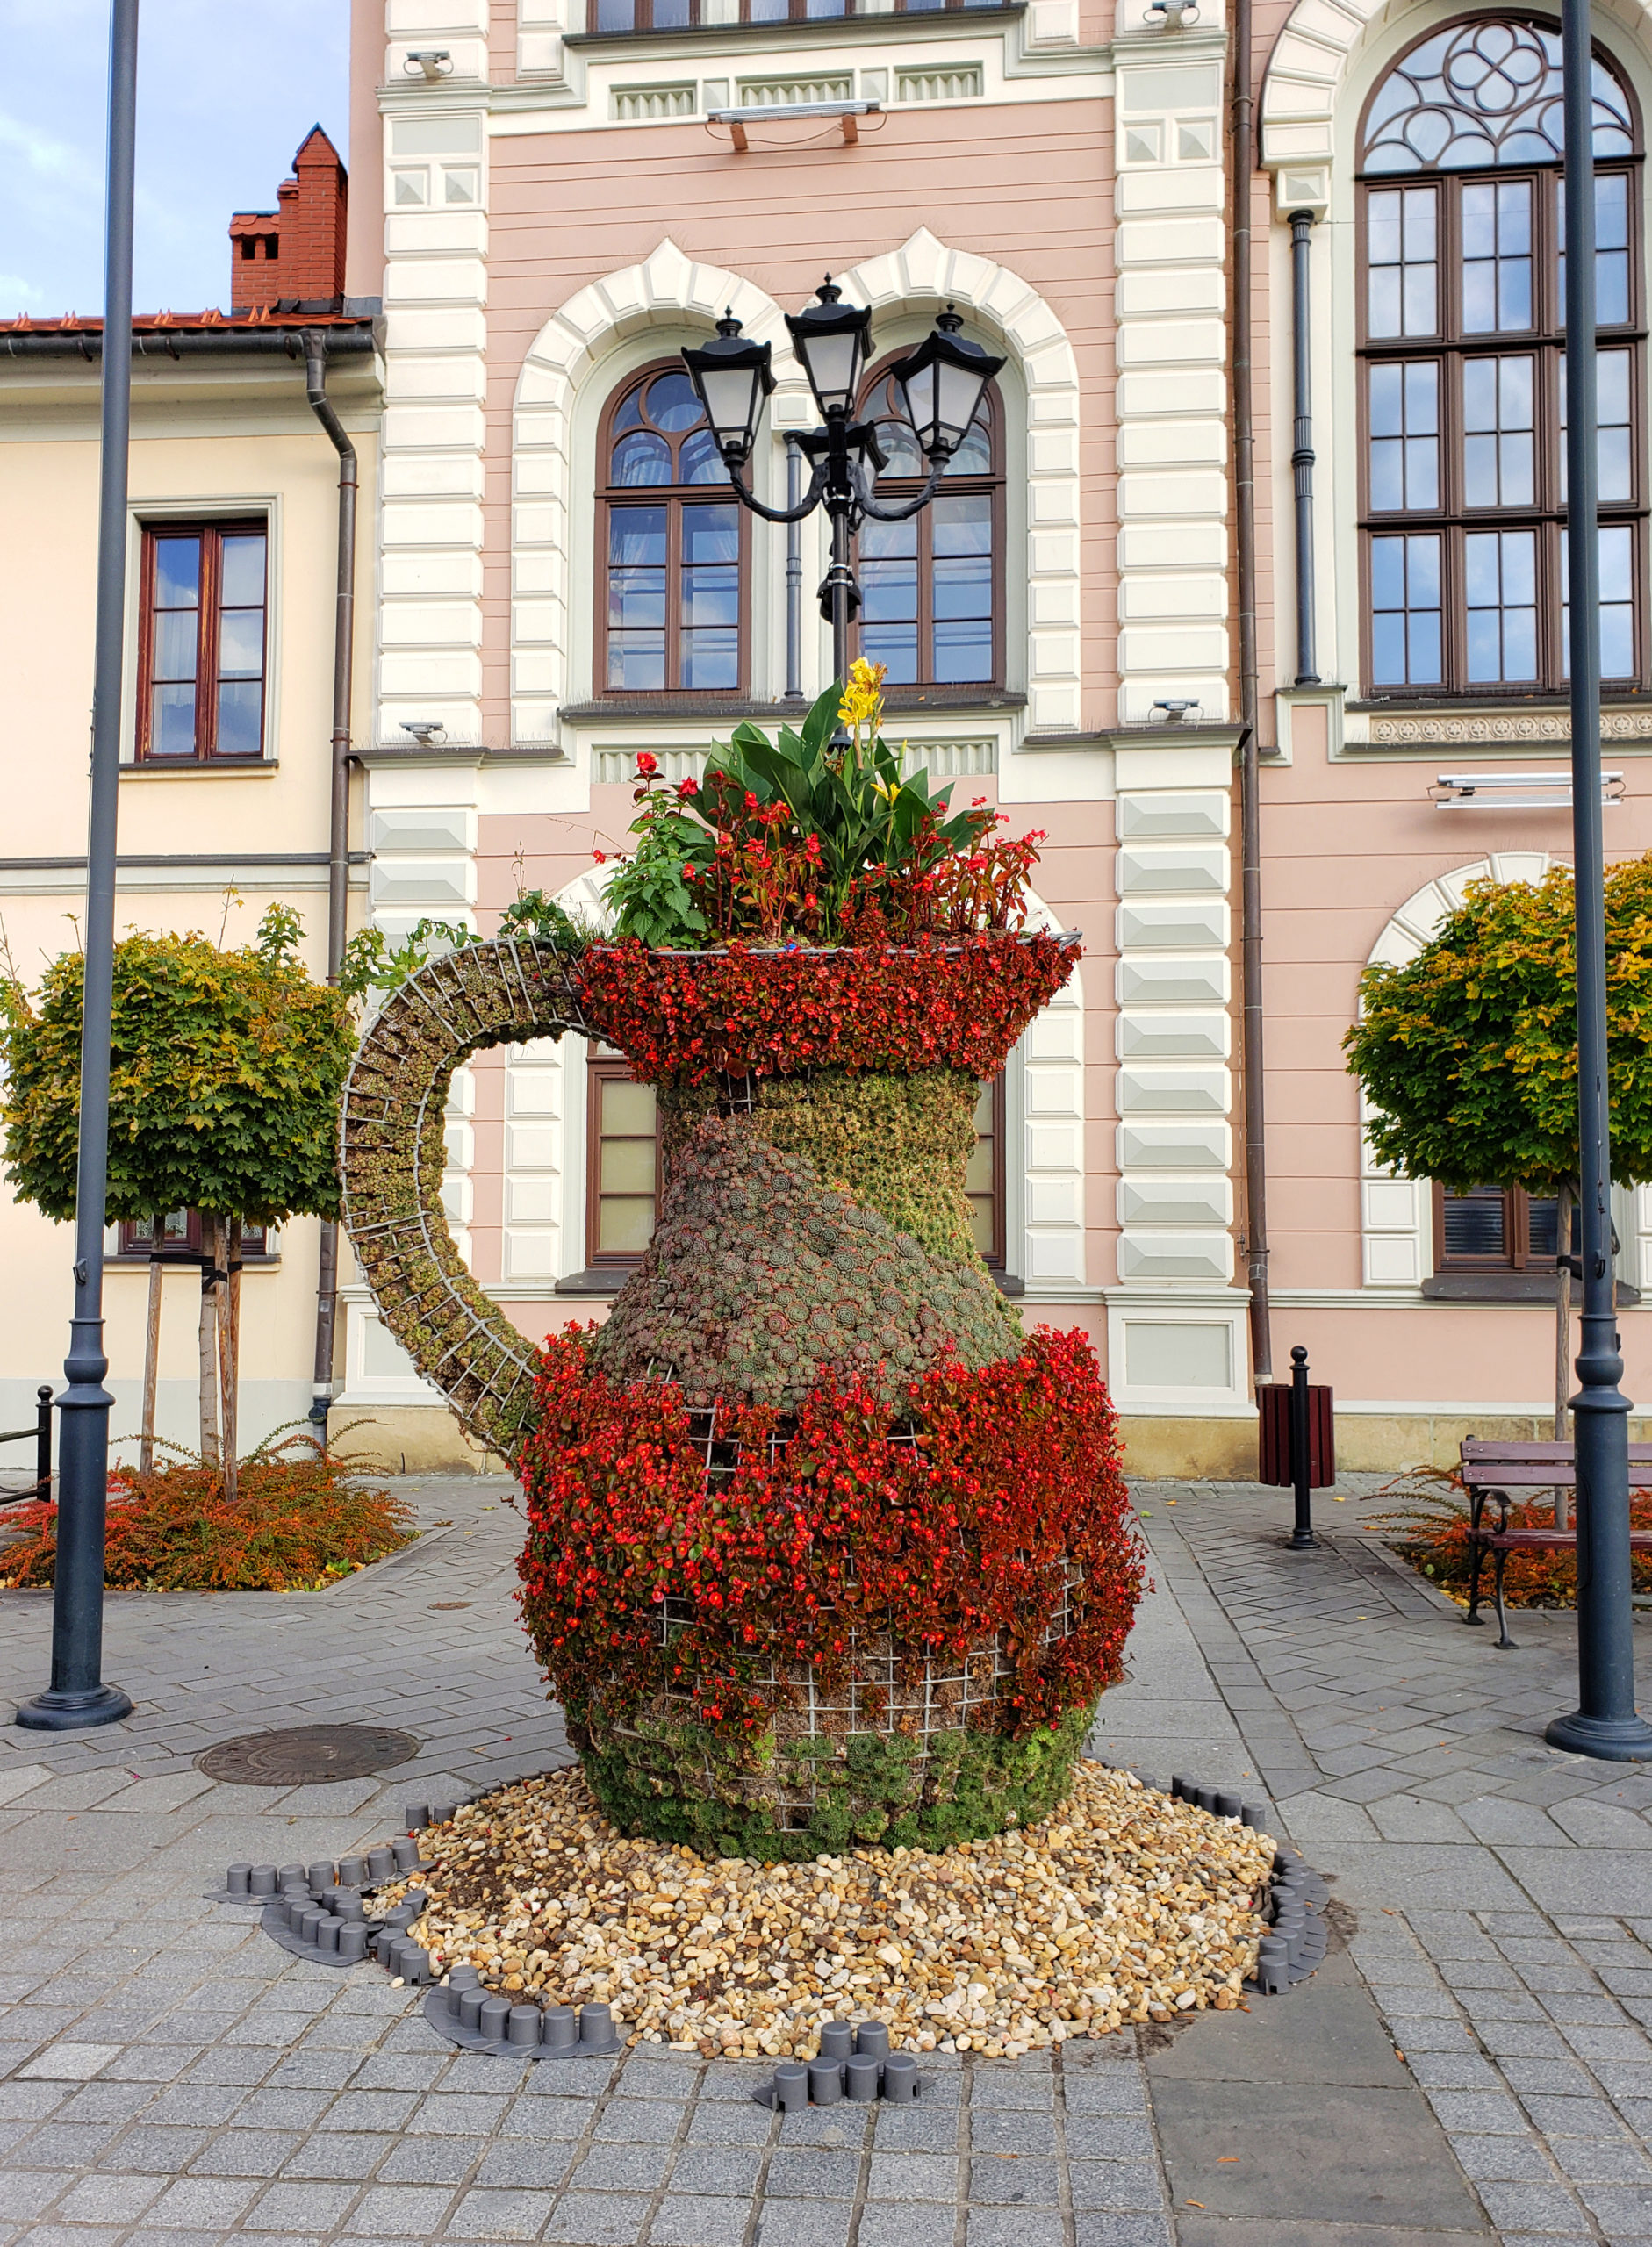 Discover This Hidden Gem In Poland - Welcome To Żywiec